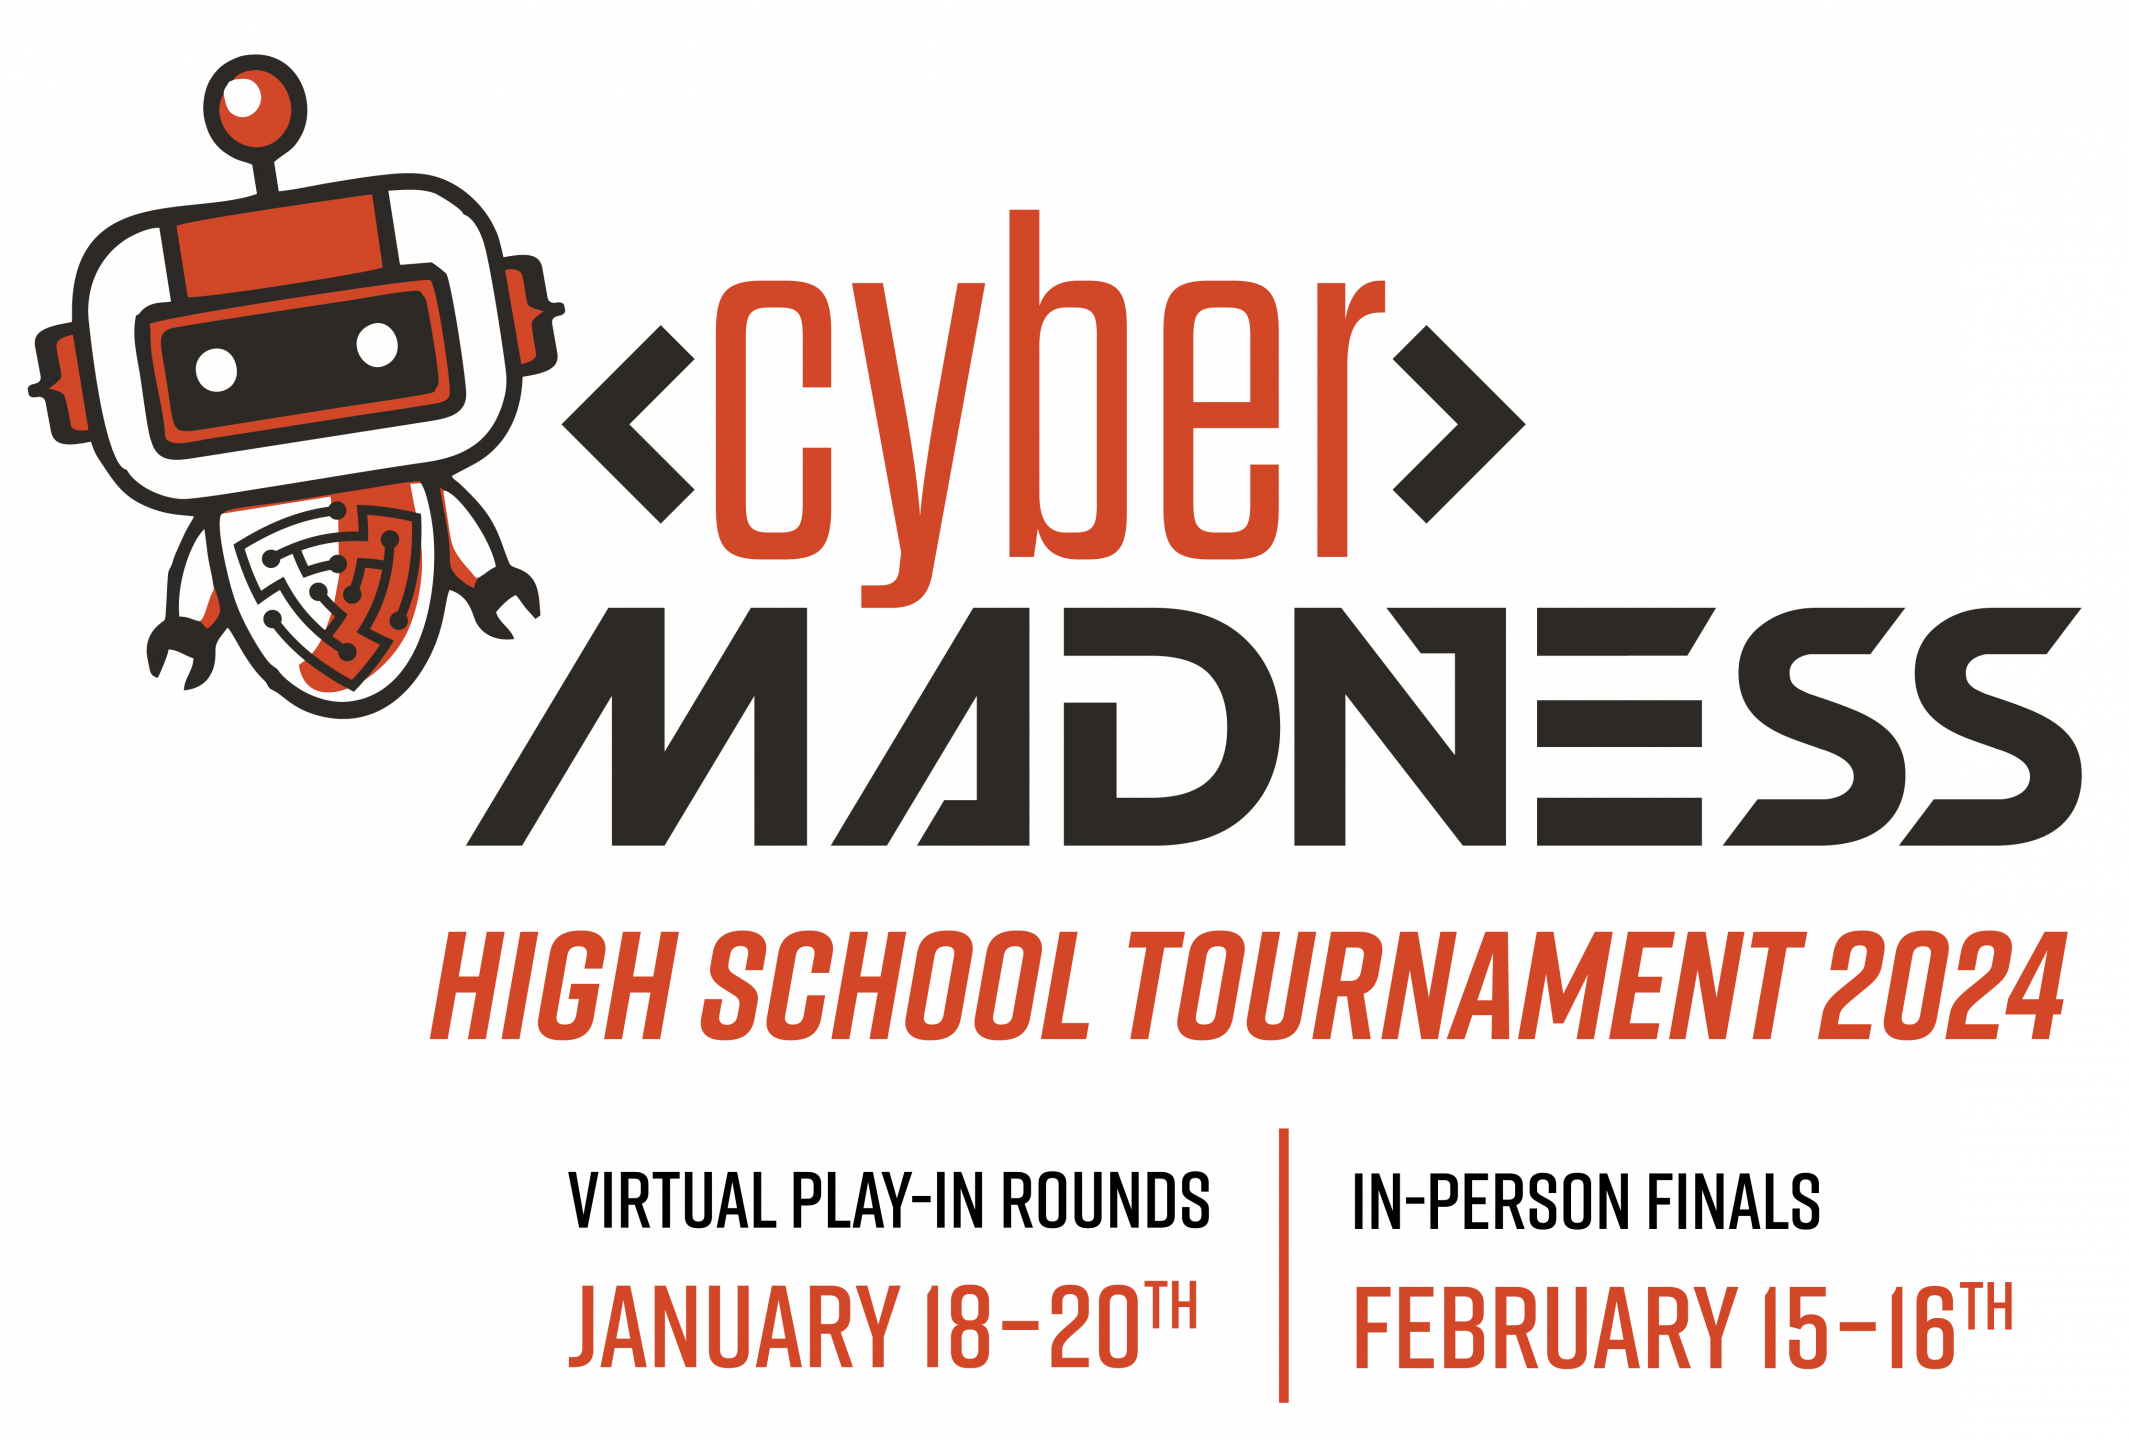 Cyber Madness High School Tournament 2024 virtual play in rounds january 18th-20th and In-person finals February 15-16th at Bismarck State College